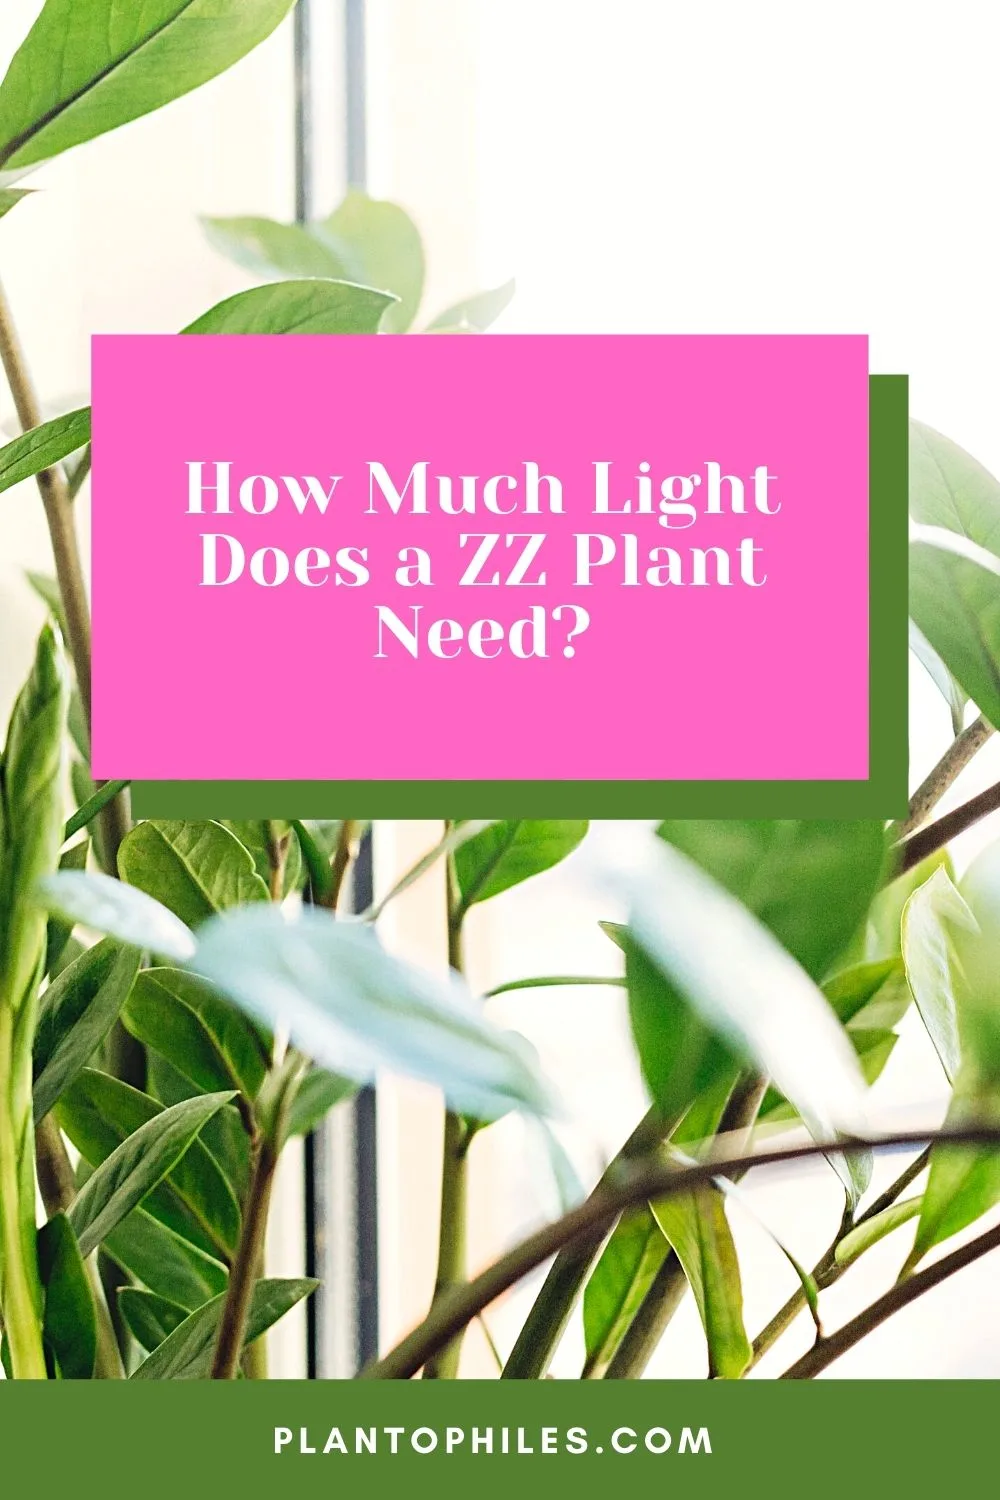 How Much Light Does a ZZ Plant Need?